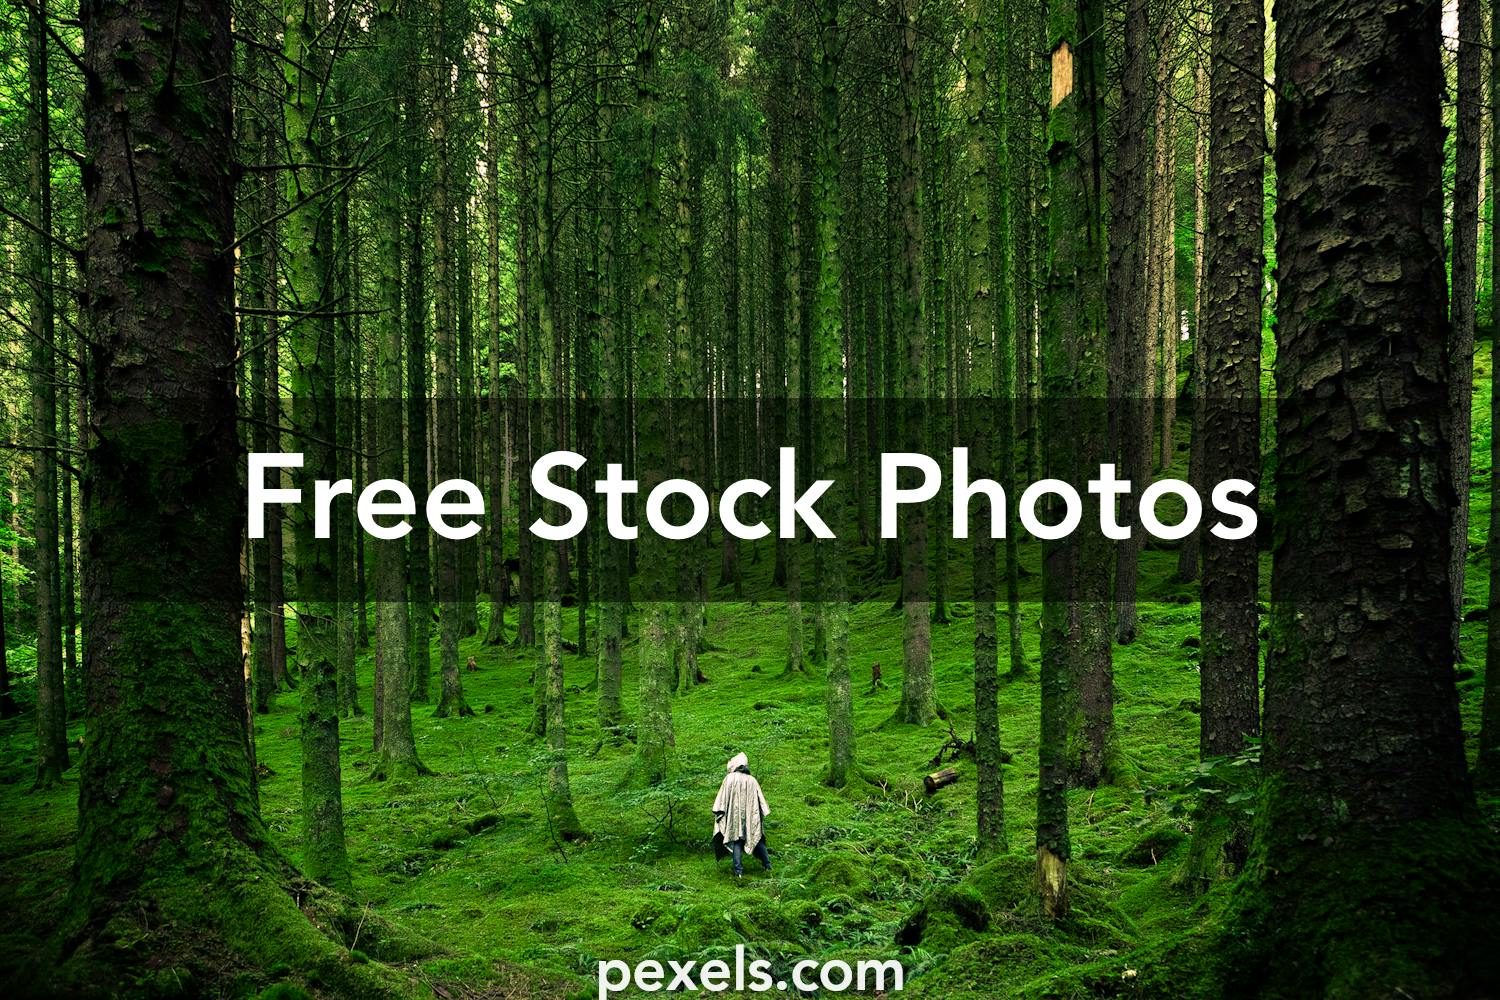 100,000+ Best Nature Images · 100% Royalty Free Pictures to Download · Pexels · Free Stock